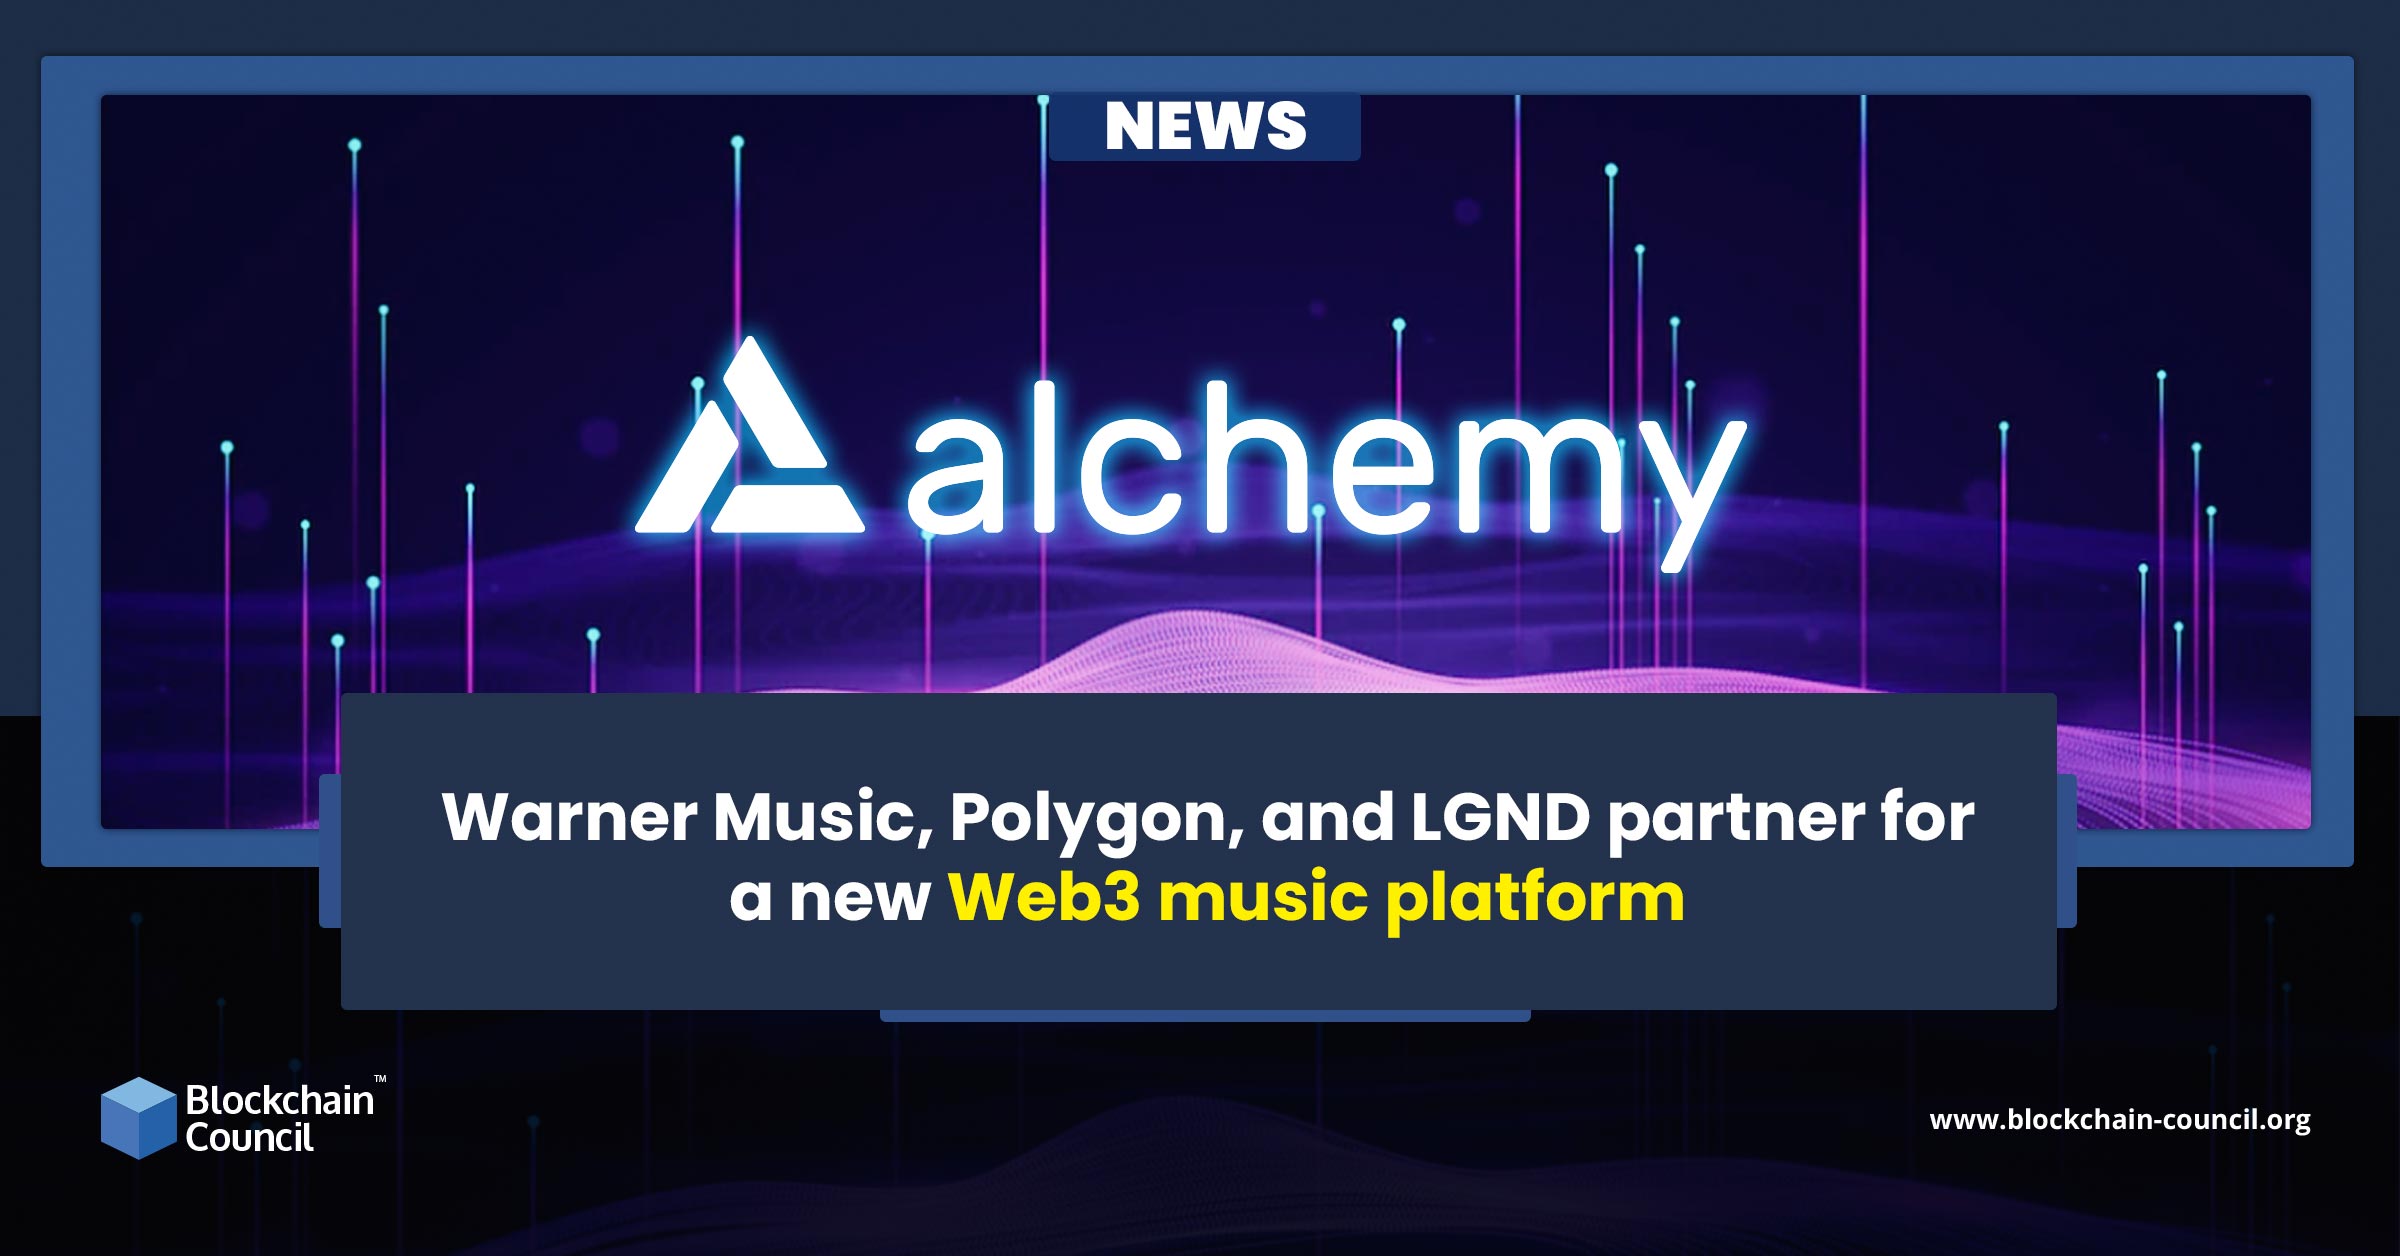 Alchemy stepped in to streamline Dapp access with their Web3 app store